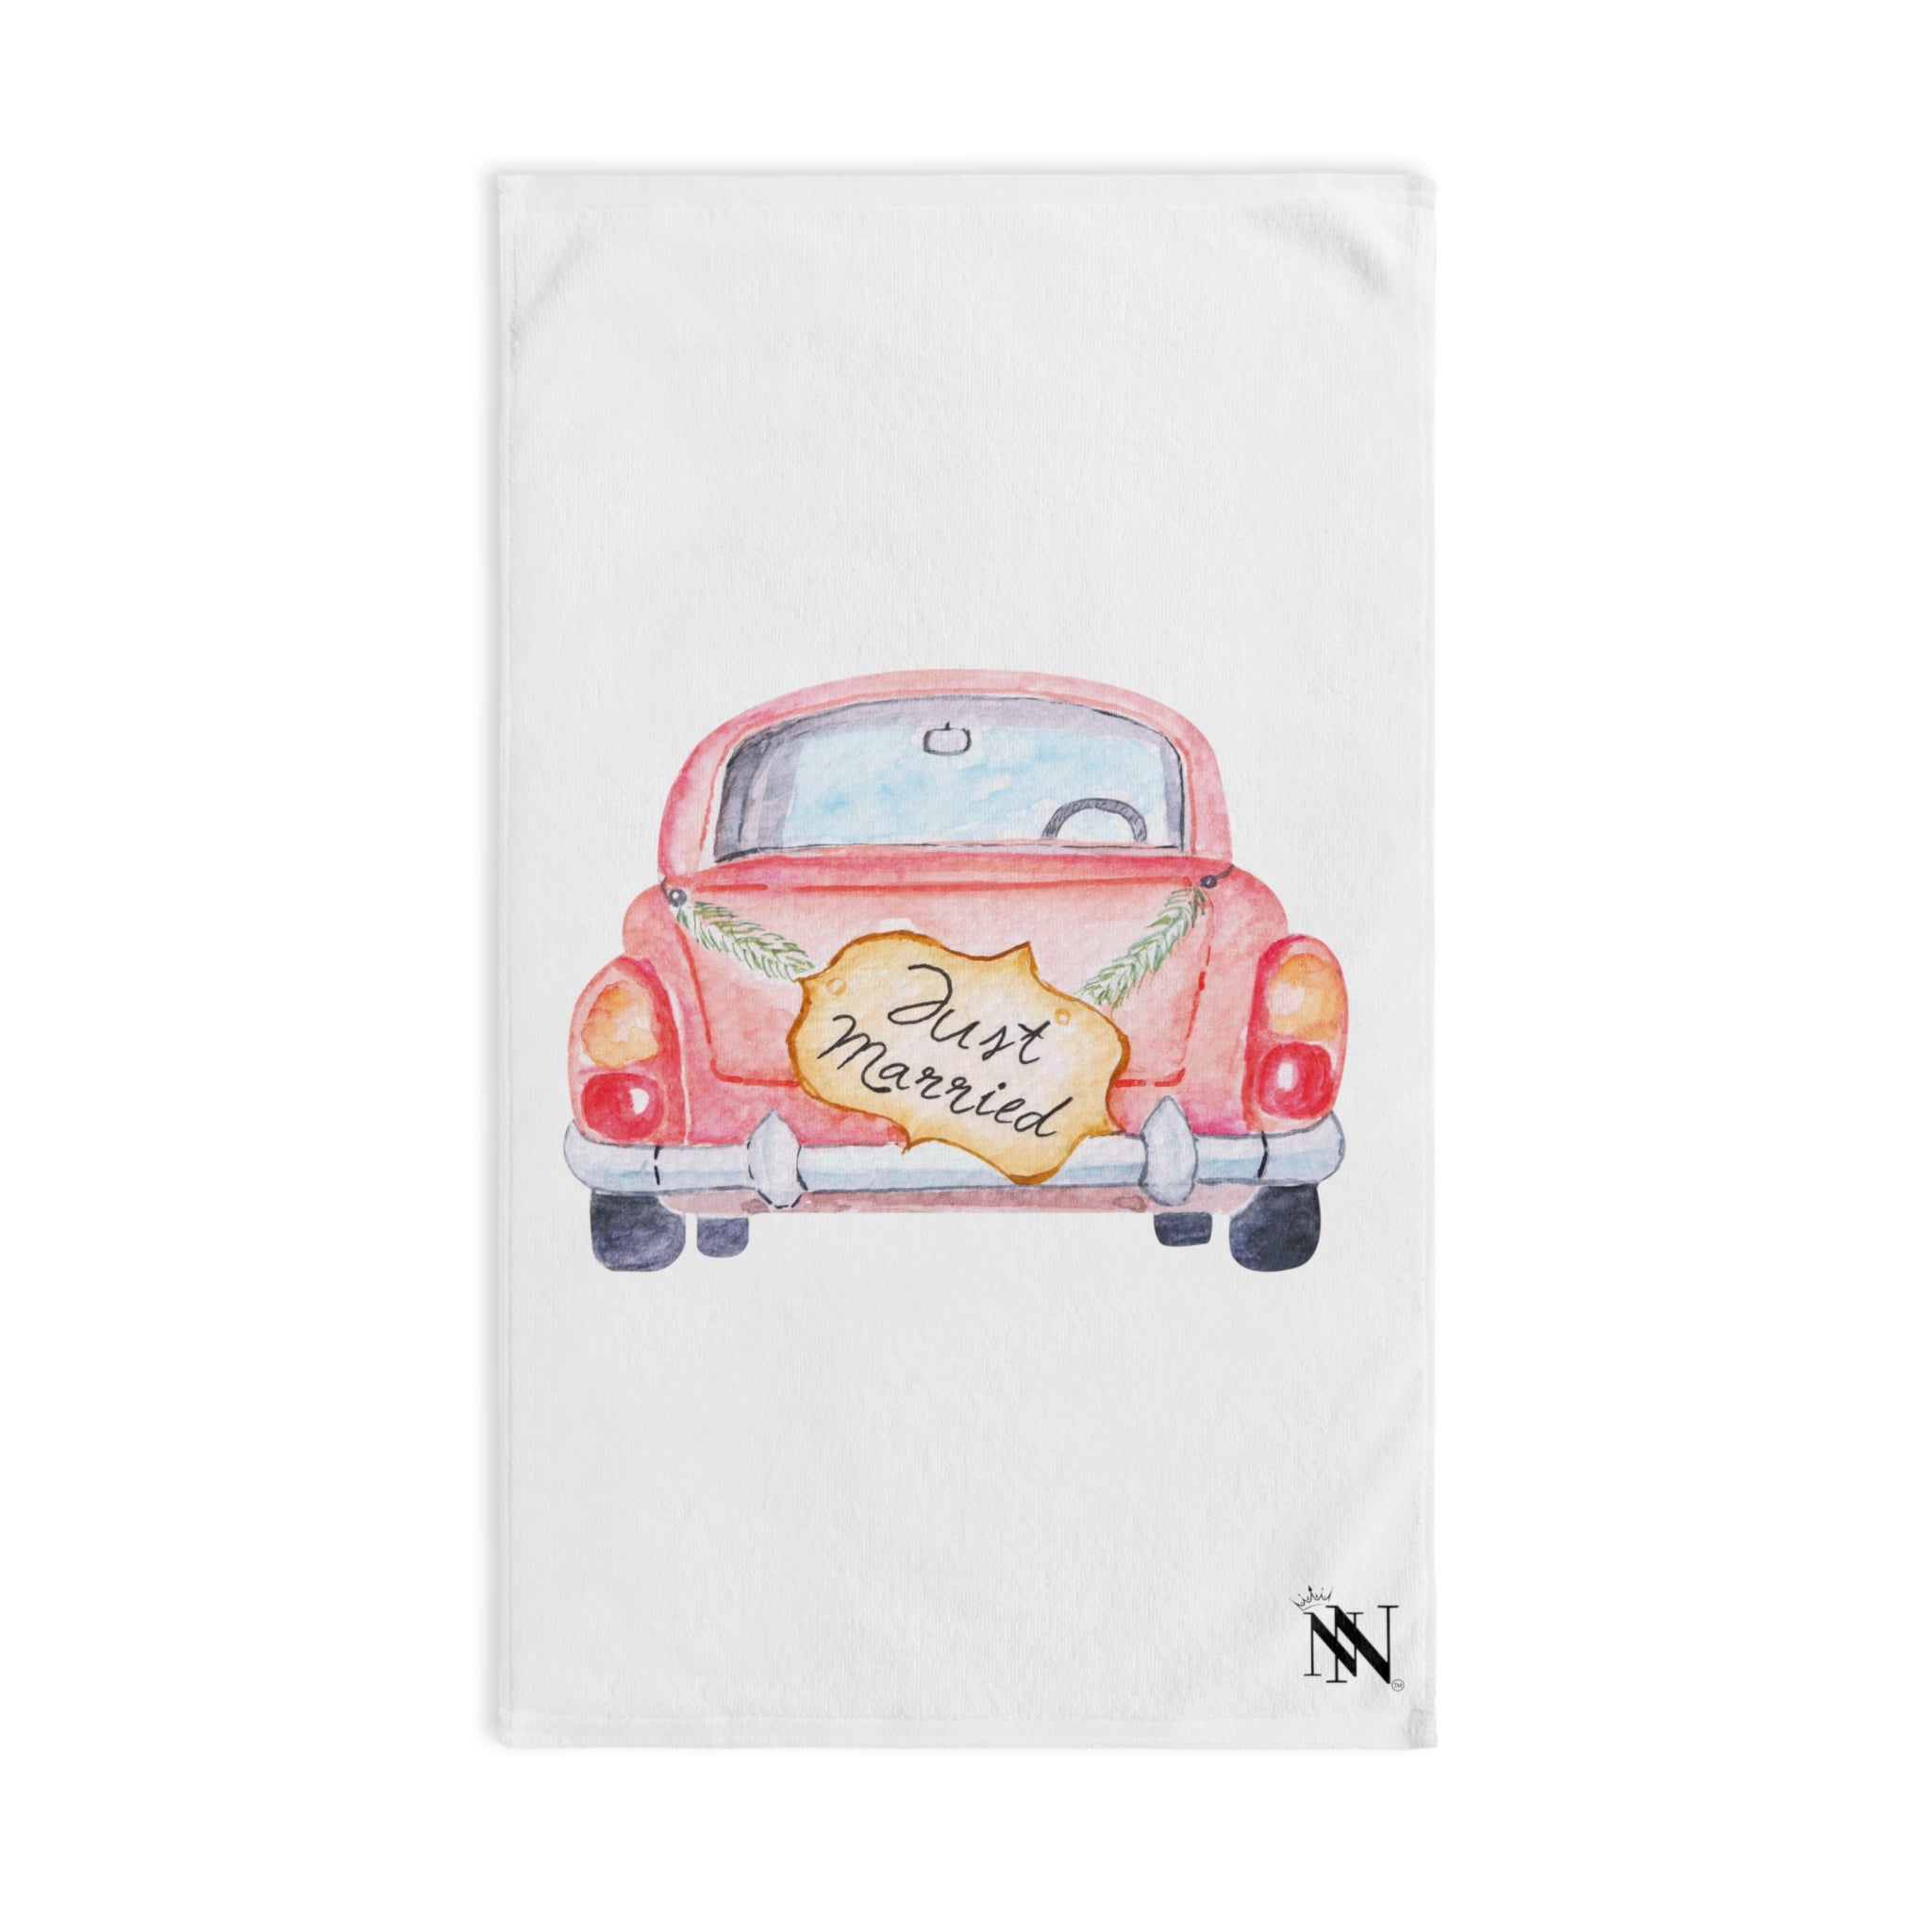 Just Married Car White | Funny Gifts for Men - Gifts for Him - Birthday Gifts for Men, Him, Her, Husband, Boyfriend, Girlfriend, New Couple Gifts, Fathers & Valentines Day Gifts, Christmas Gifts NECTAR NAPKINS